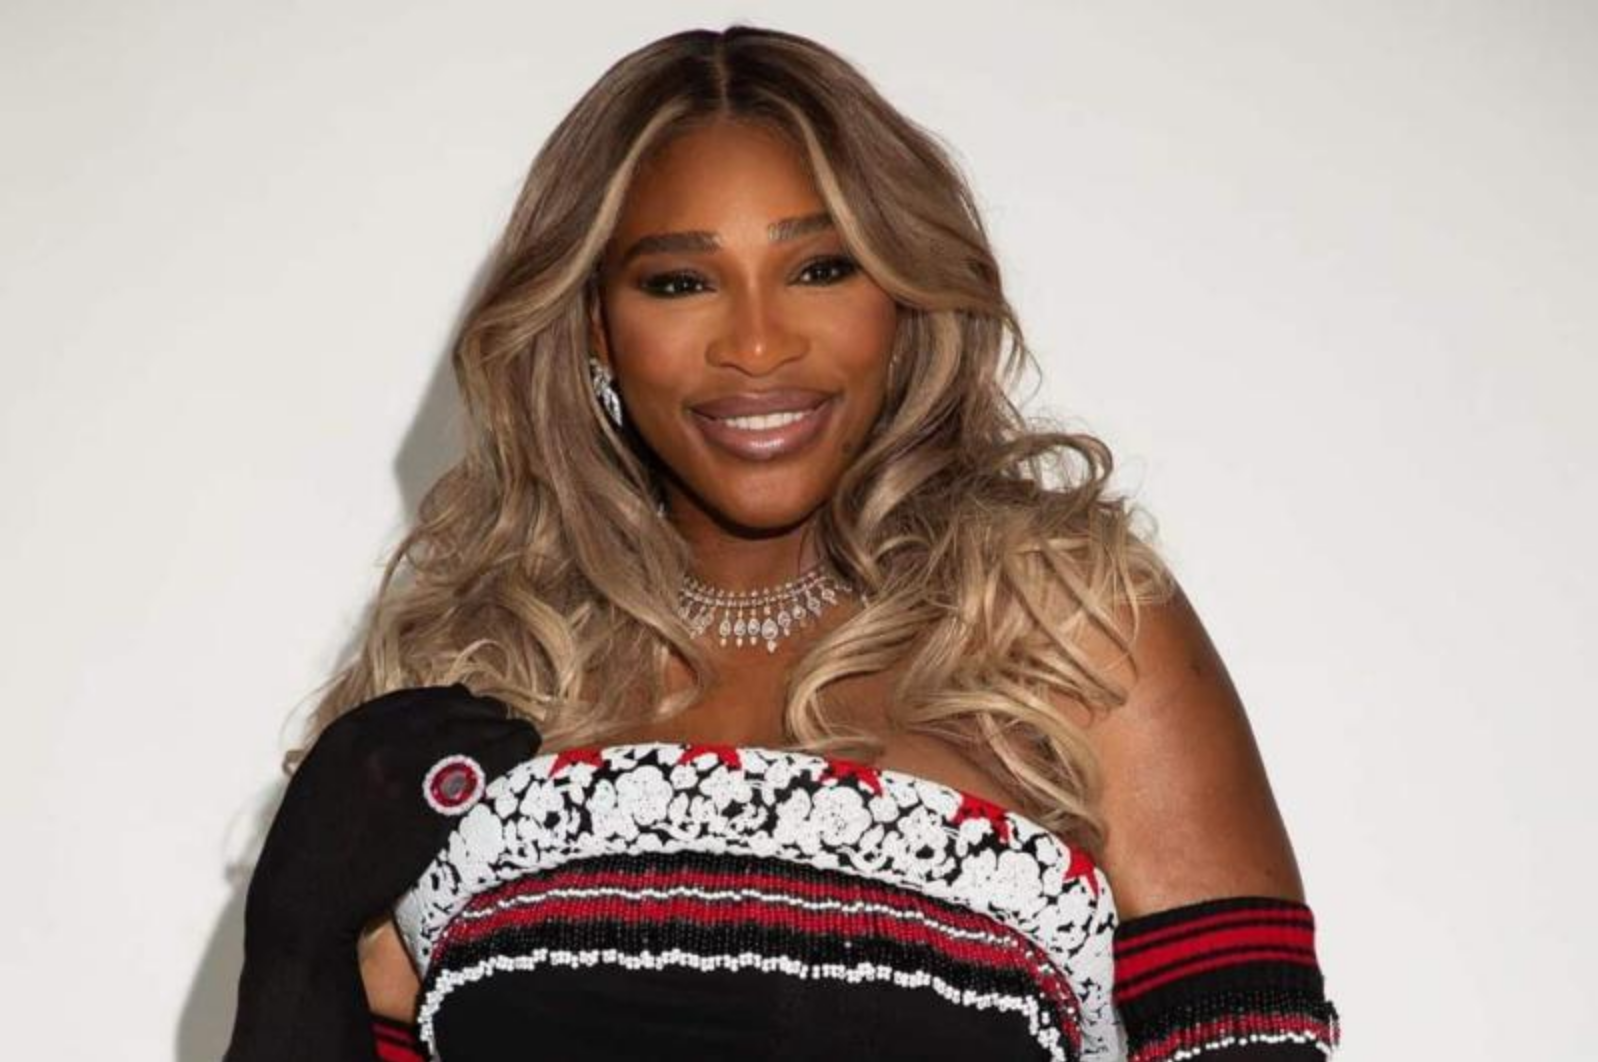 Serena Williams Has Invested In 14 Companies That Reached Unicorn Status, A Value Of $1B Or More